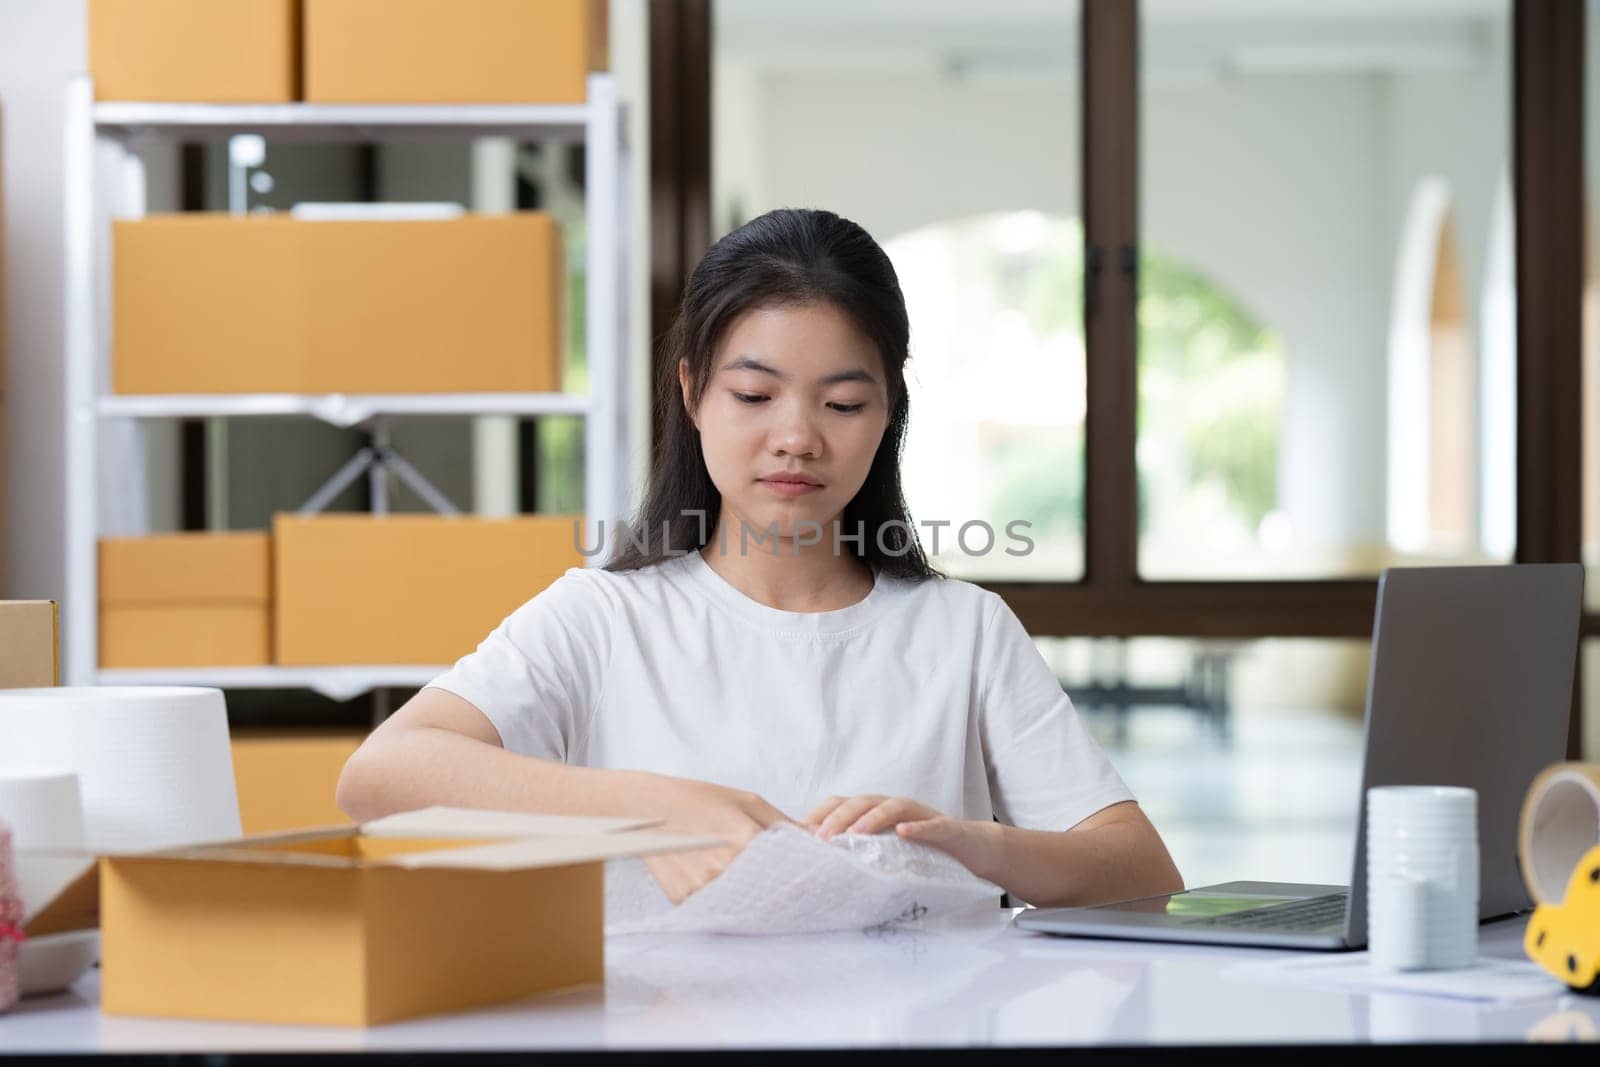 Young woman packing product for customer with cardboard box.